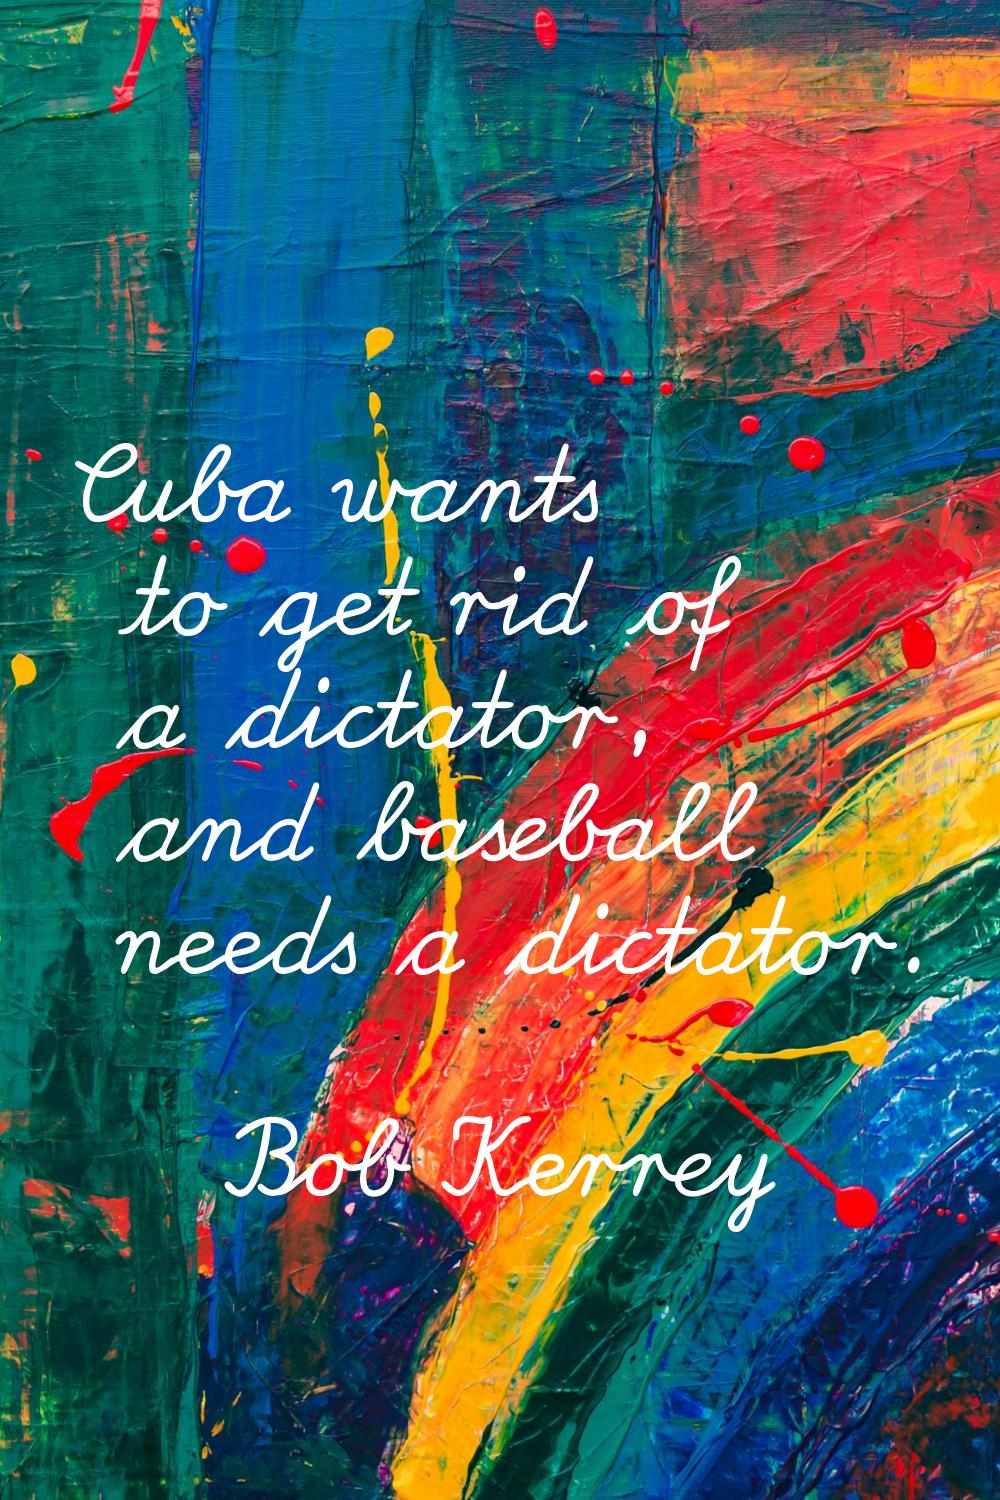 Cuba wants to get rid of a dictator, and baseball needs a dictator.